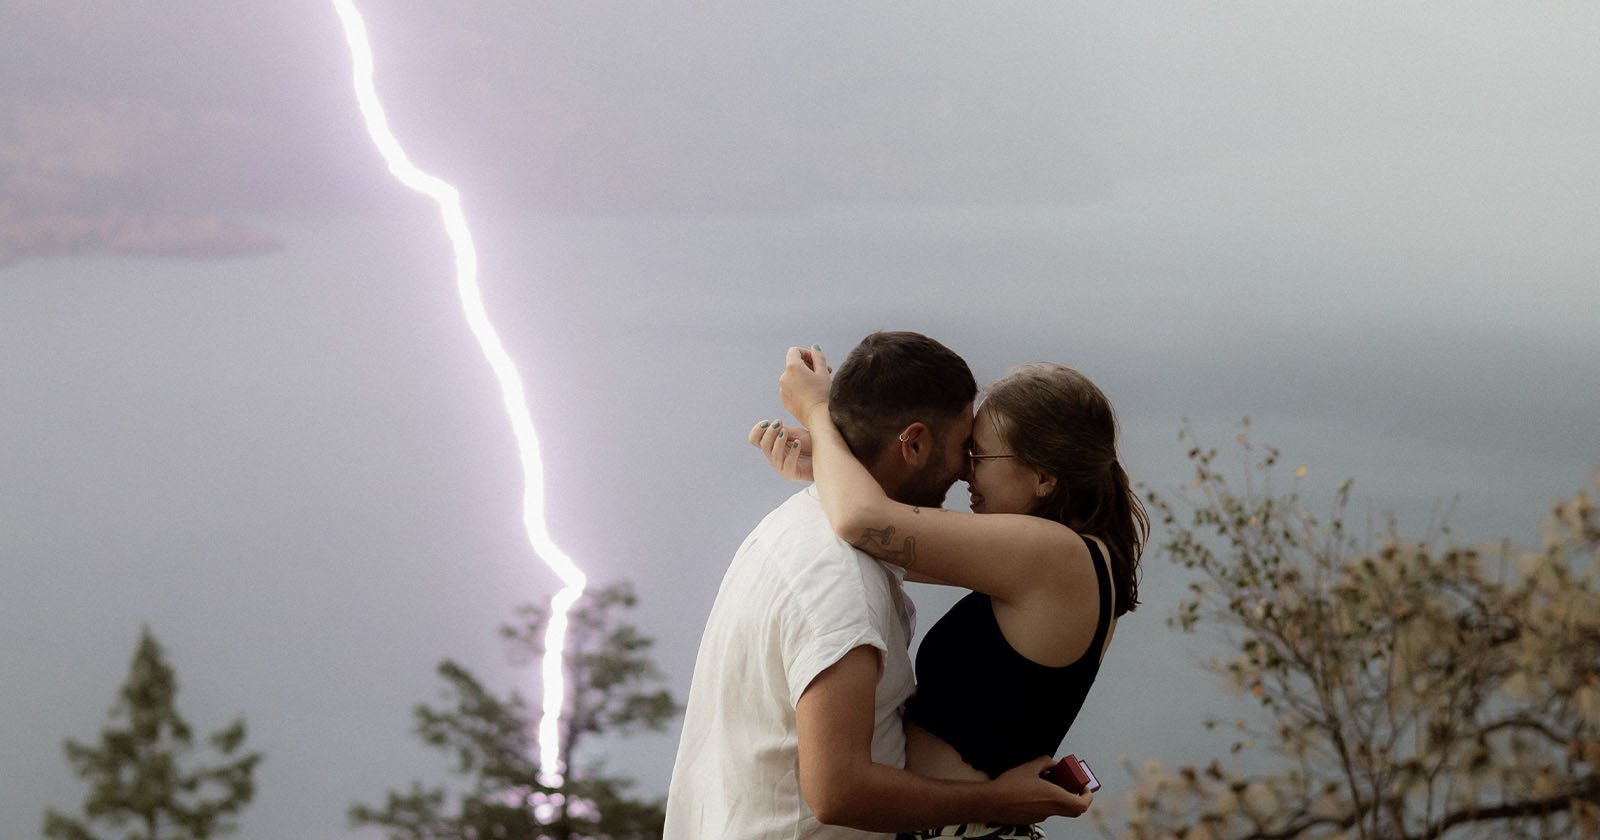  lightning strikes exact moment girlfriend accepts marriage proposal 